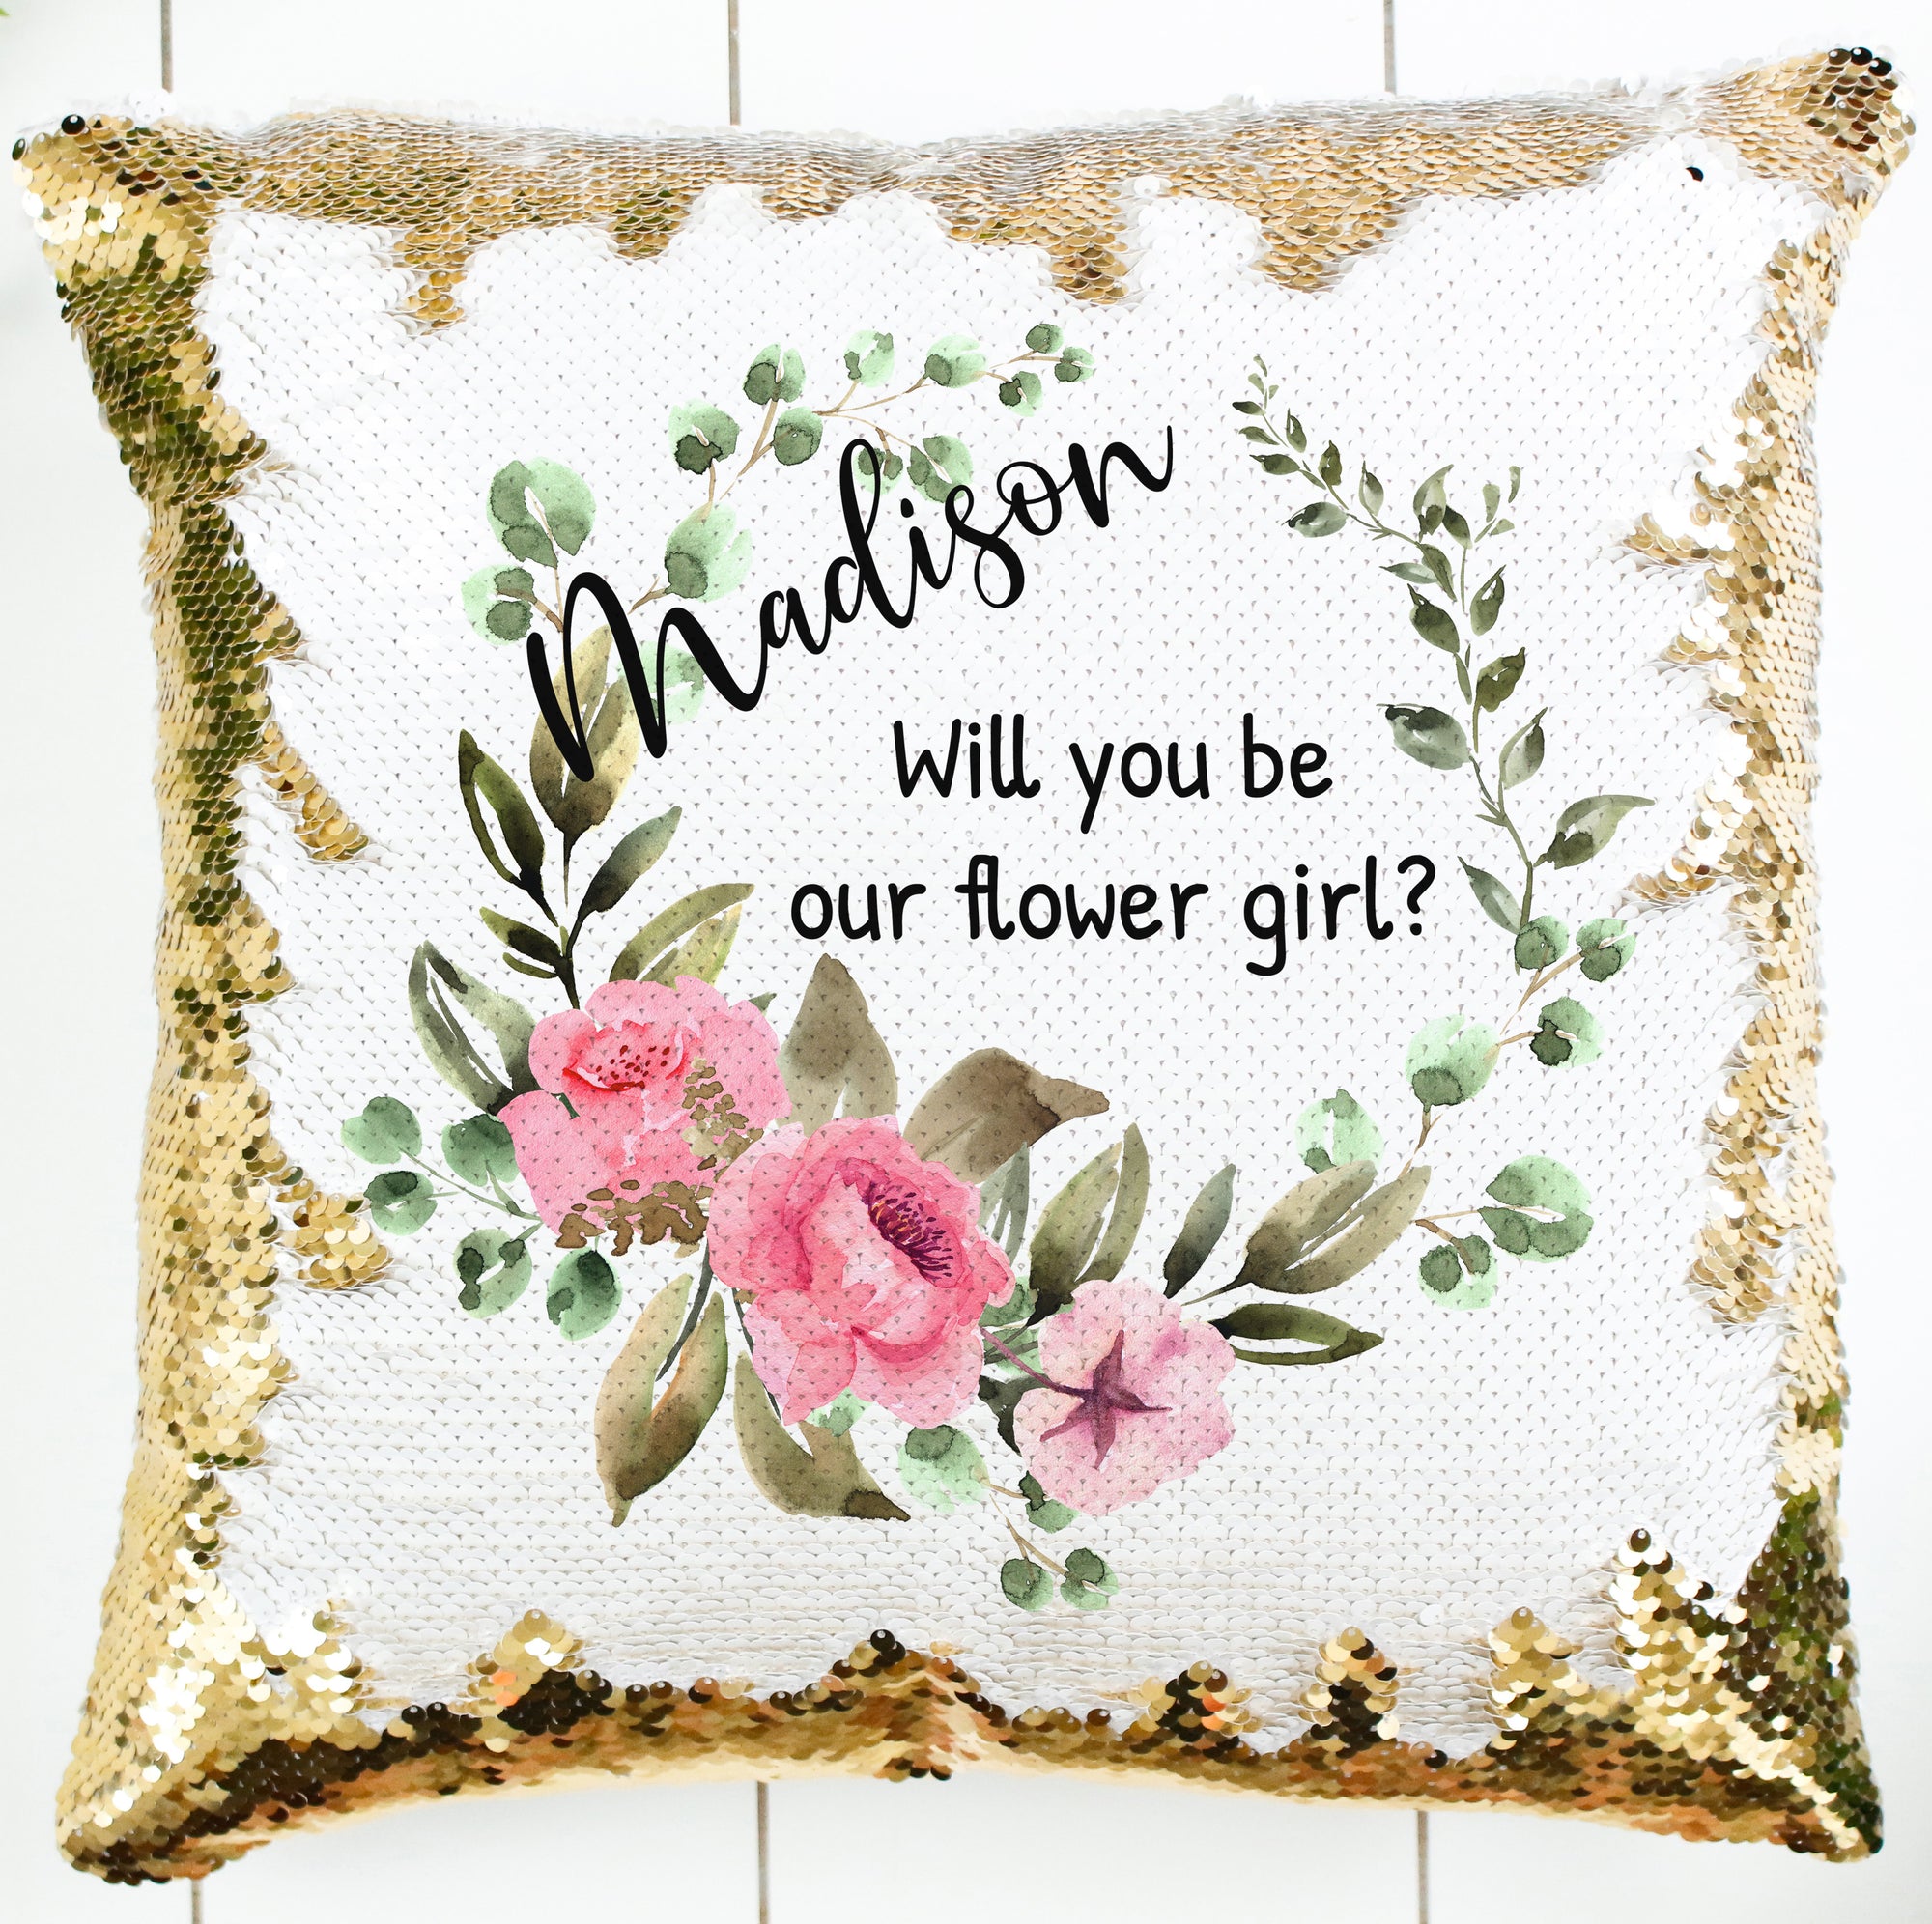 Personalized Rose Greenery Wreath Pillow